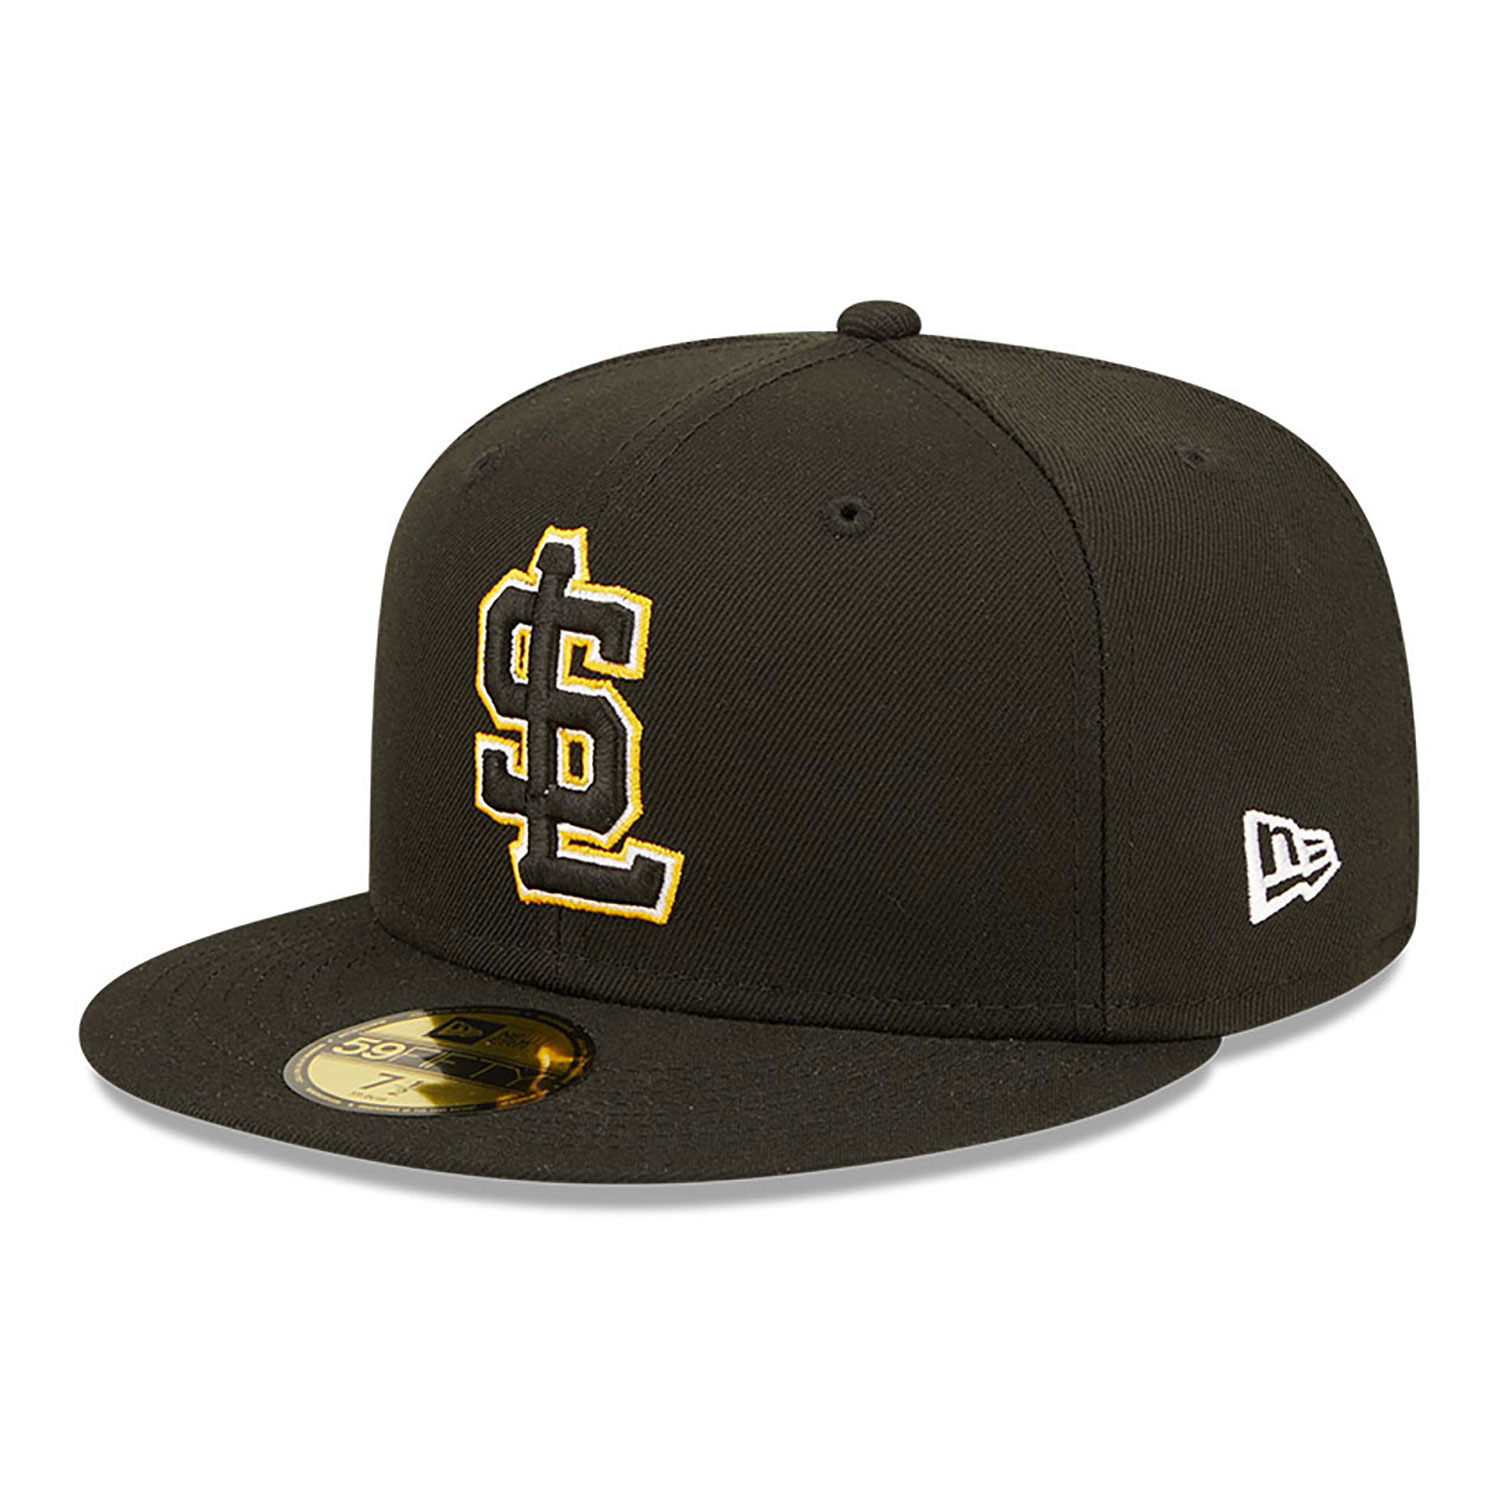 Official New Era MiLB Salt Lake City Bees 59FIFTY Fitted Cap C2_348 ...